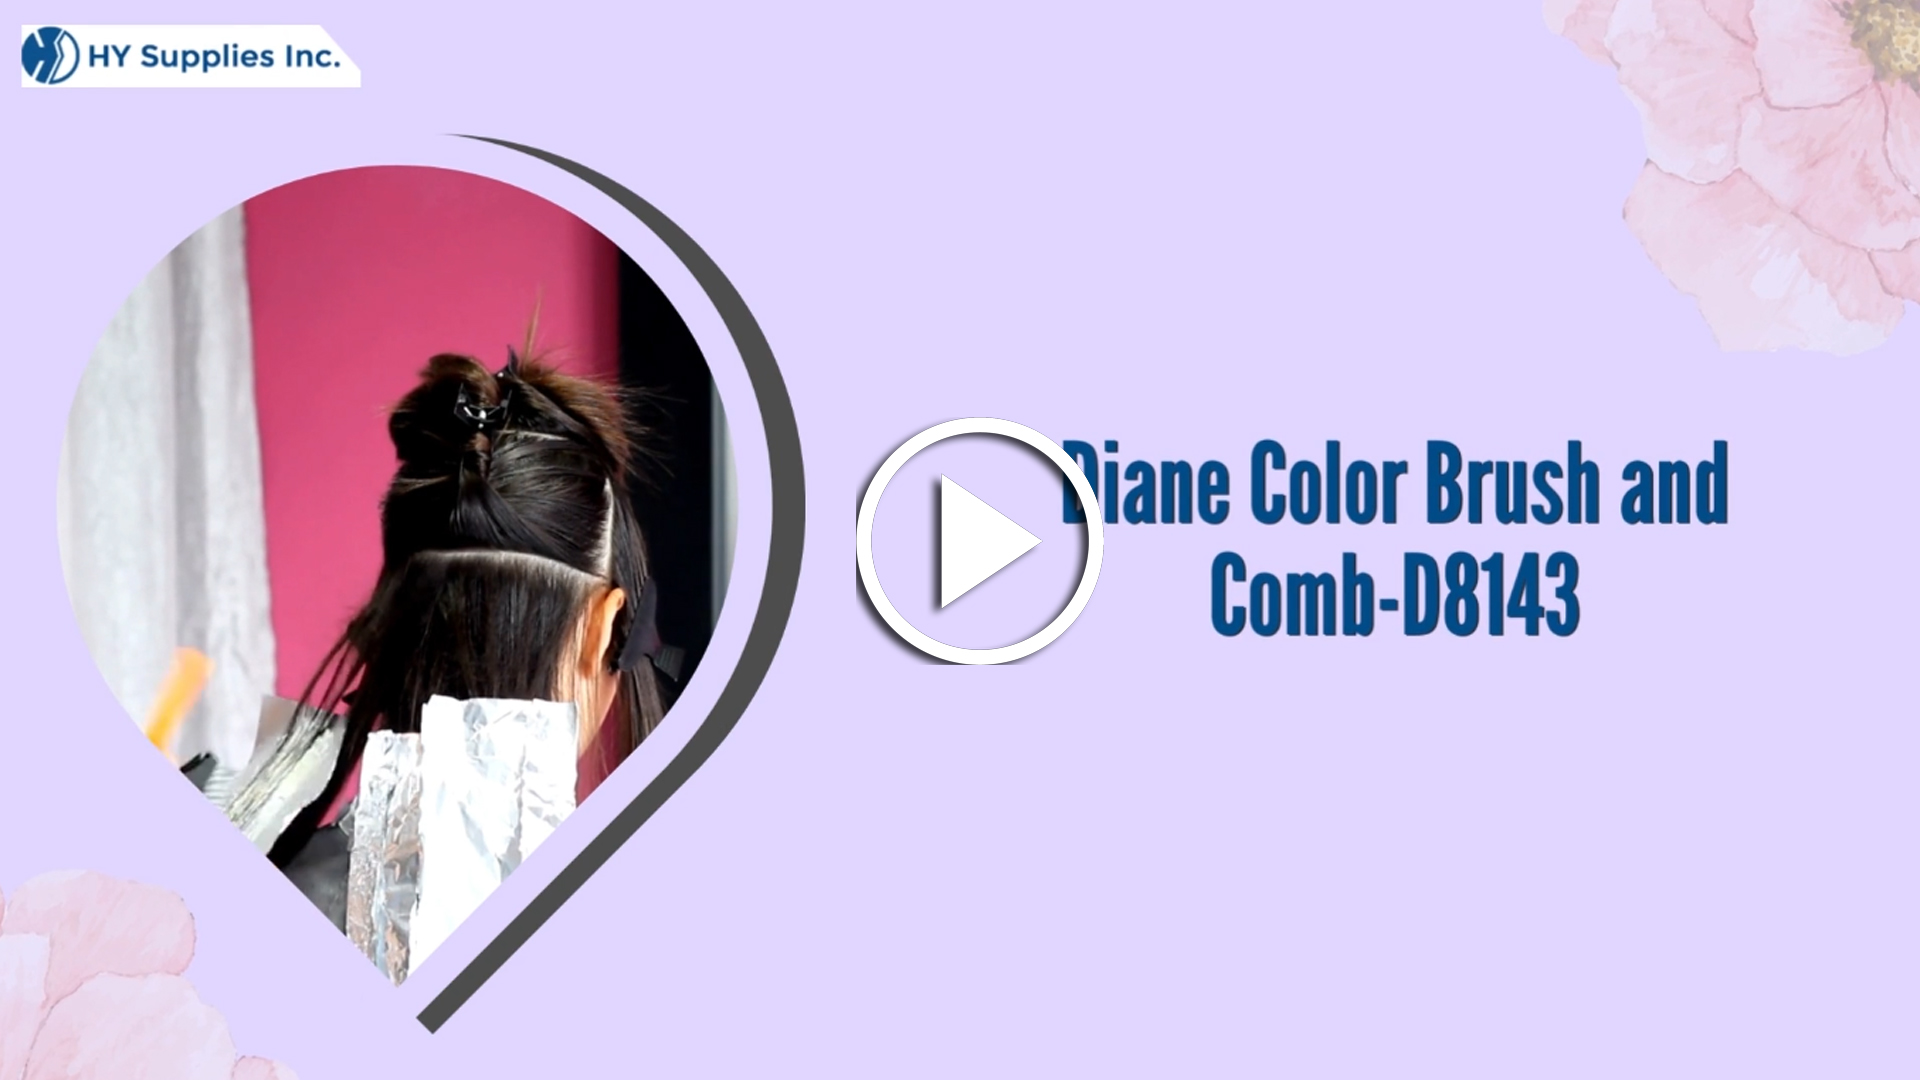 Diane Color Brush and Comb-D8143